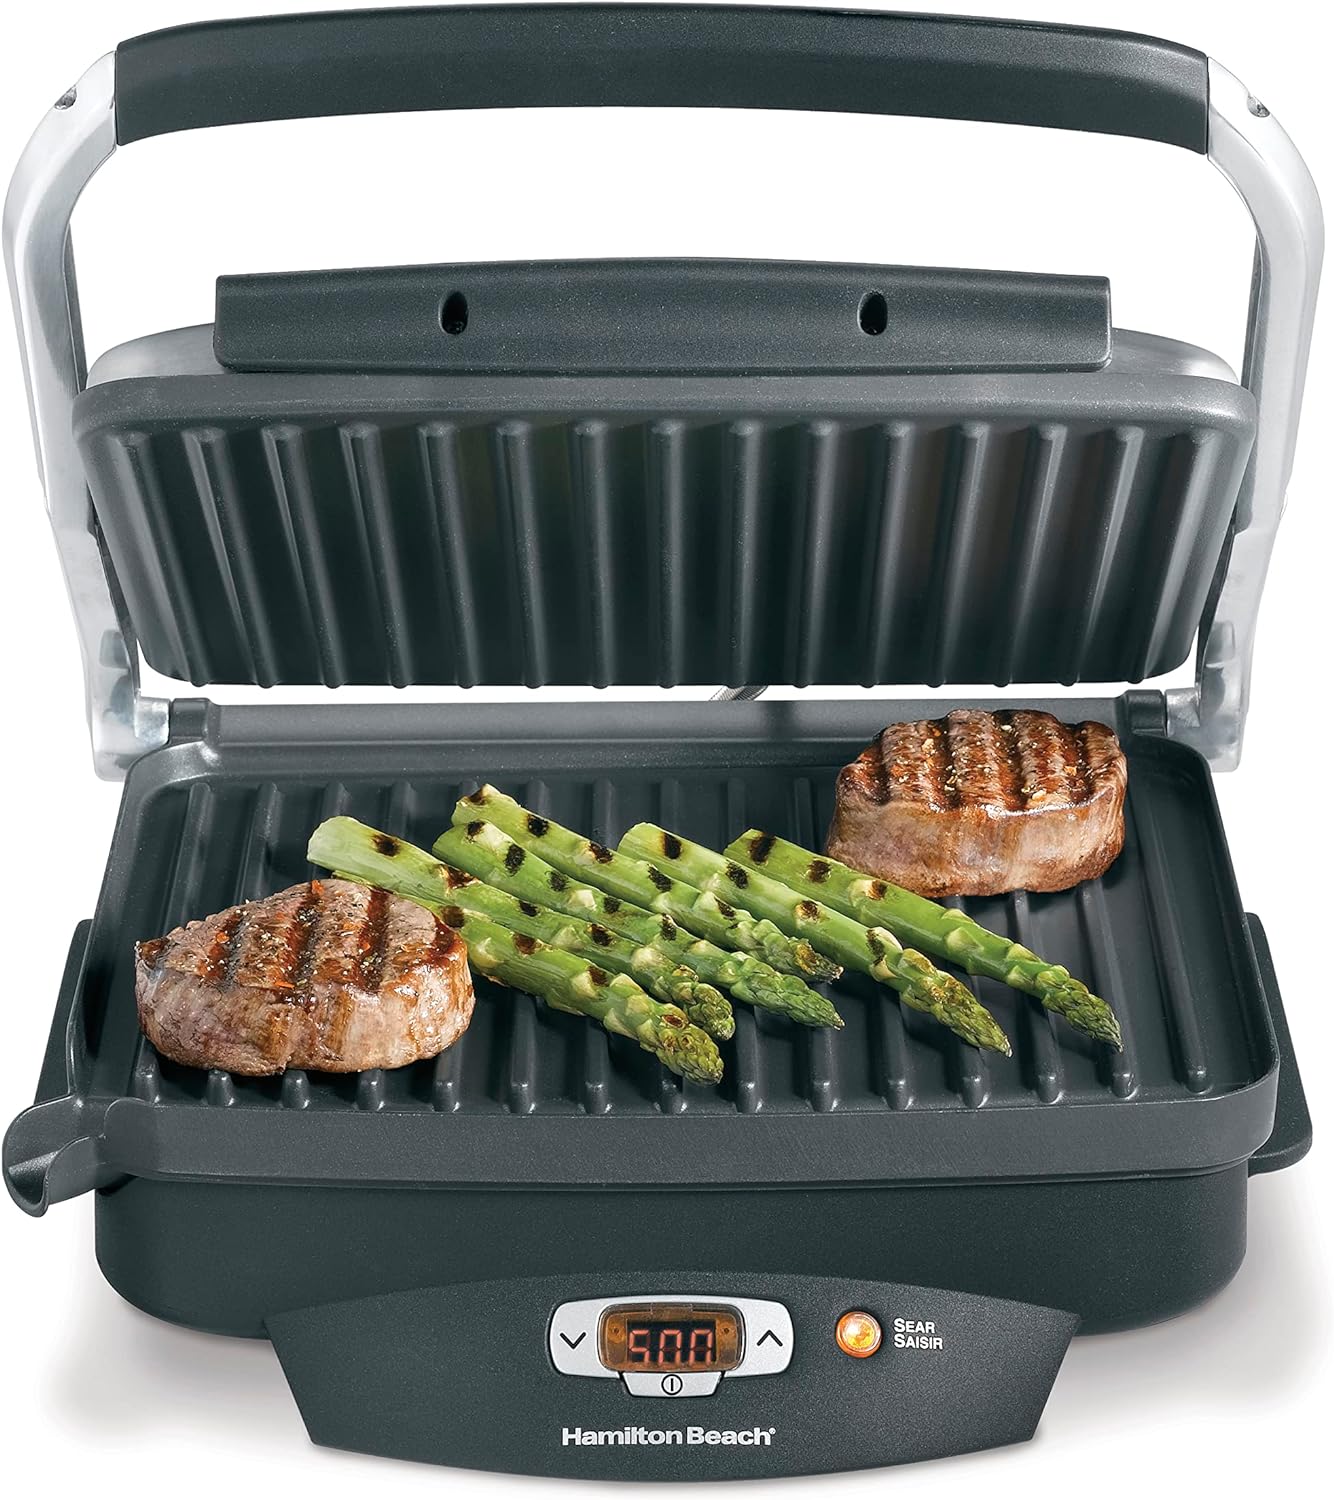 Hamilton Beach Steak Lovers Electric Indoor Searing Grill, Nonstick 100 Square, Stainless Steel (25331), Black and Stainless, Medium